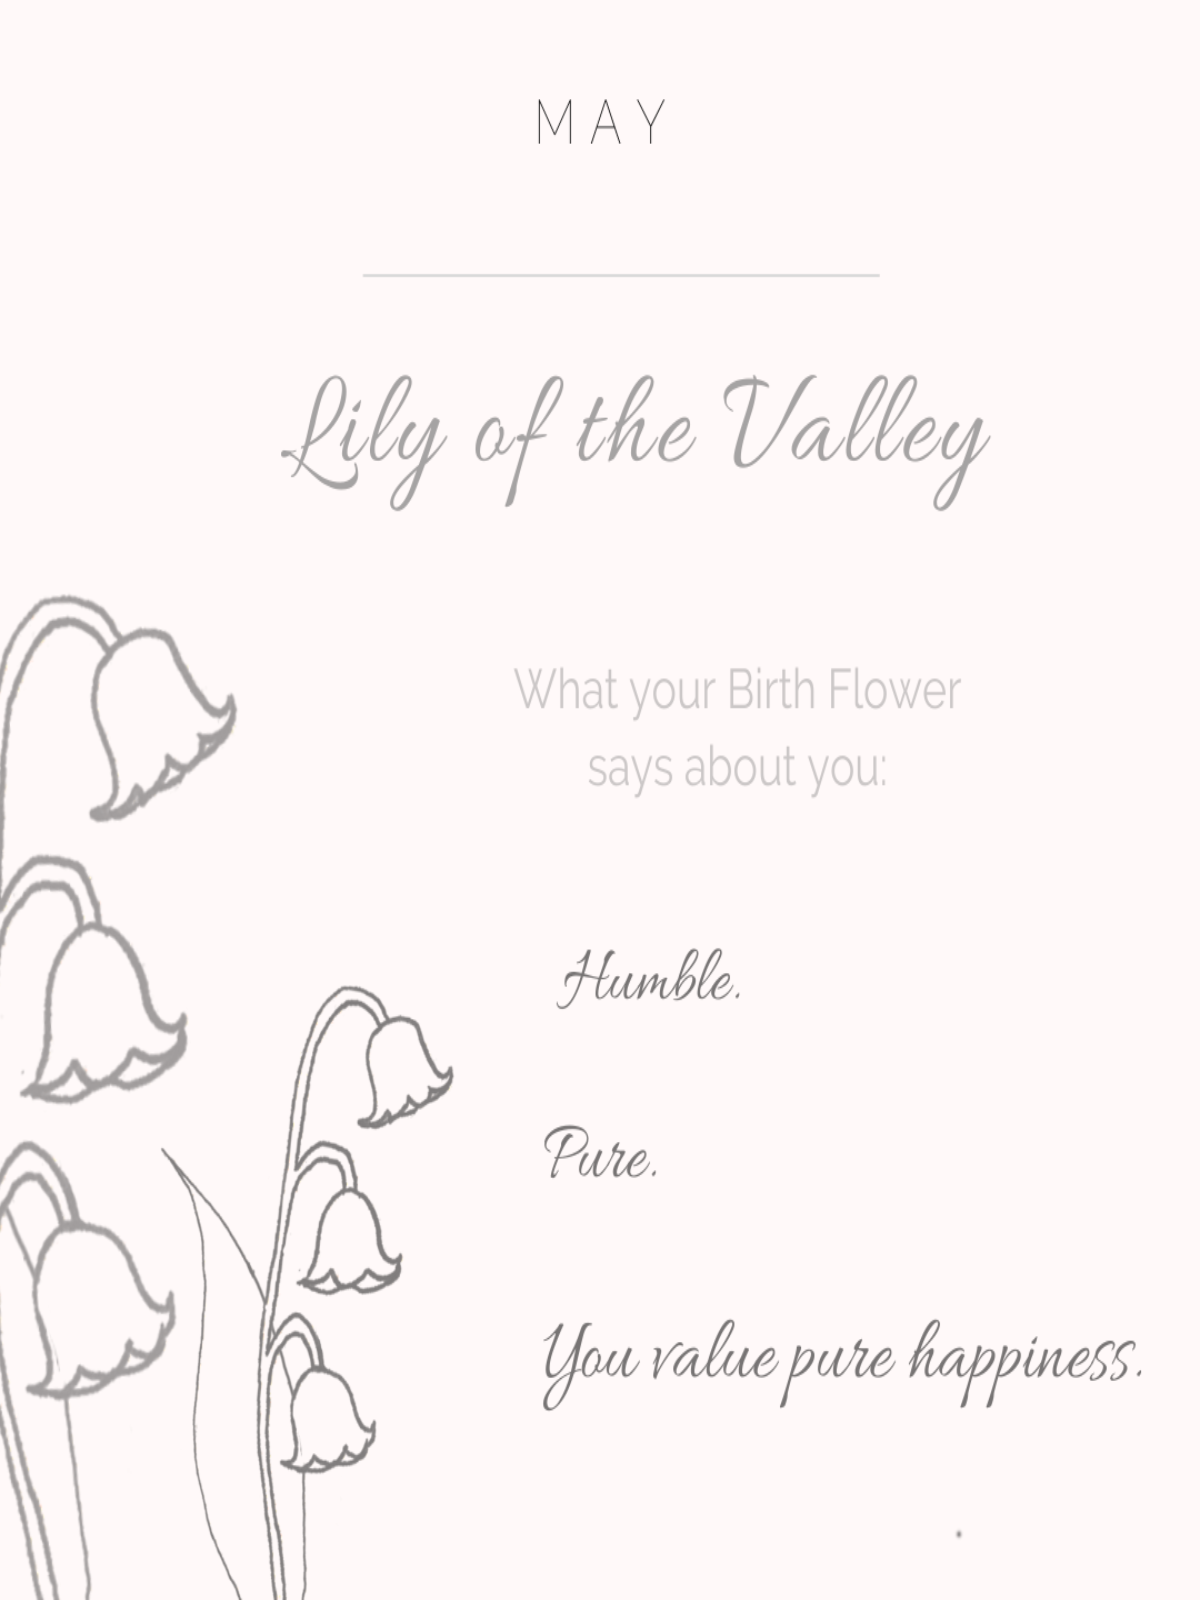 Lily of the Valley - May Birth Flower